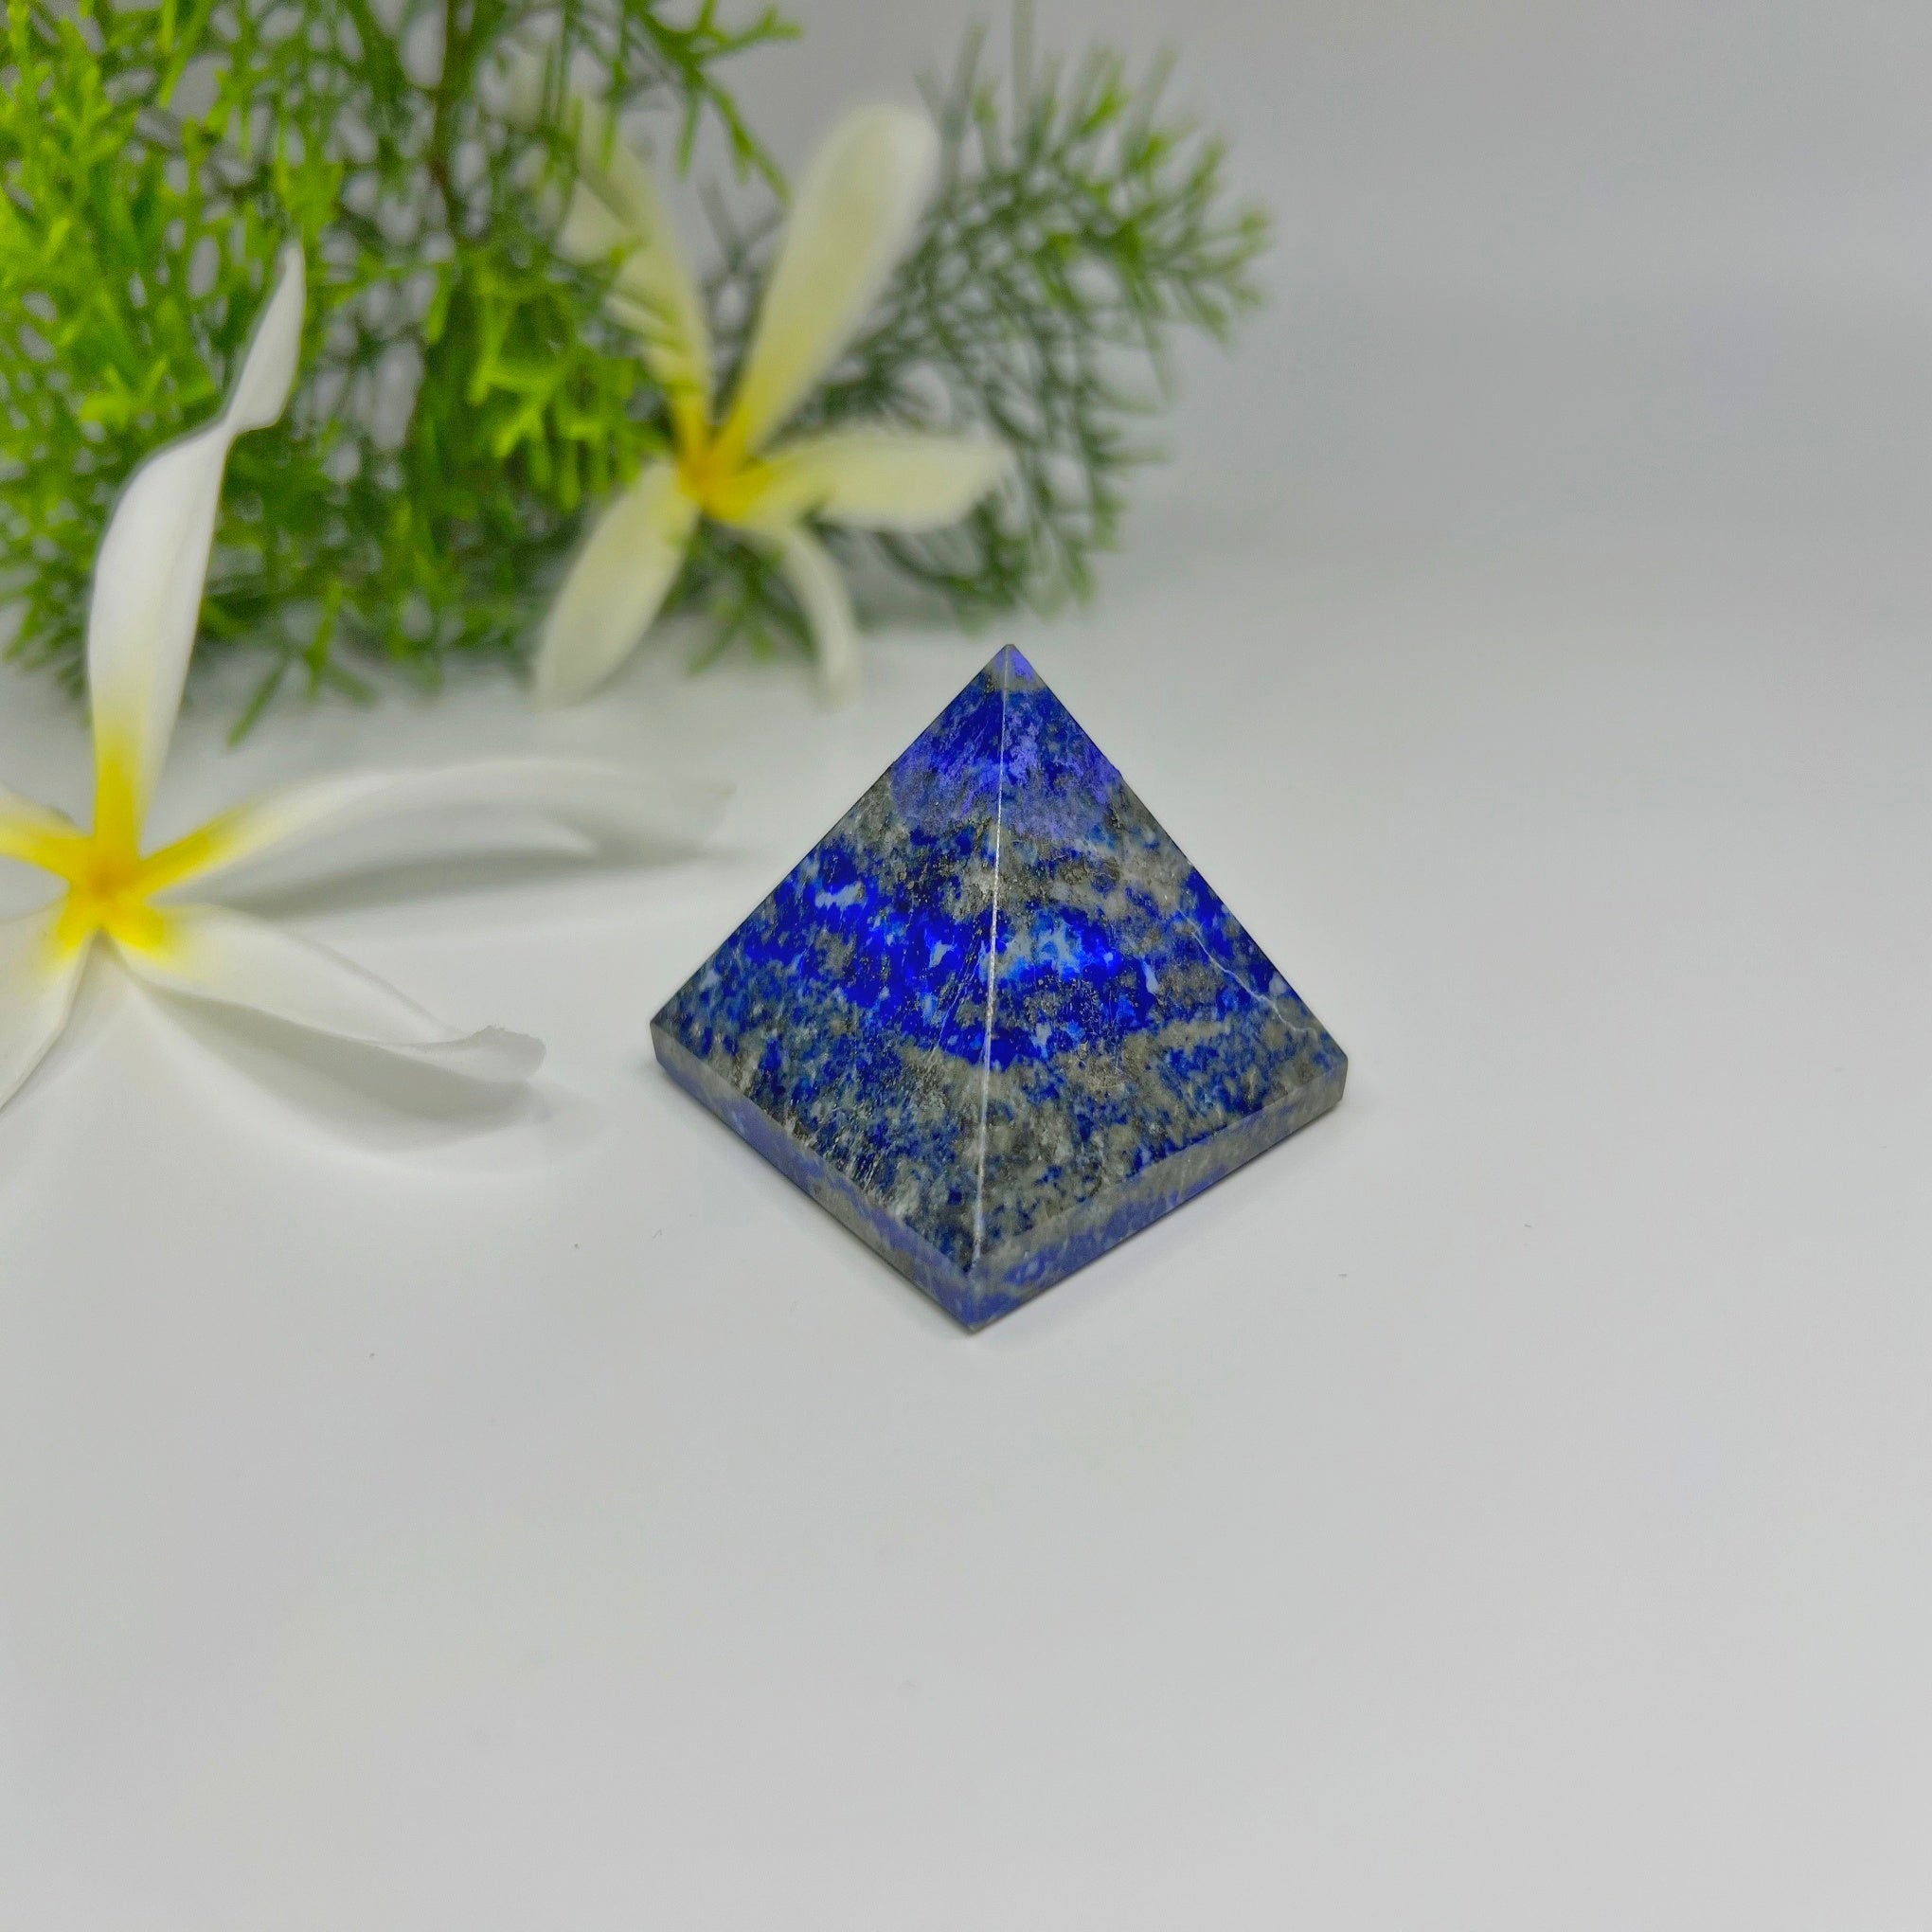 CERTIFIED LAPIS LAZULI PYRAMID CRYSTAL- BLUE COLOUR MEDITATION HEALING ACCESSORY CERTIFIED HOME OFFICE GIFT